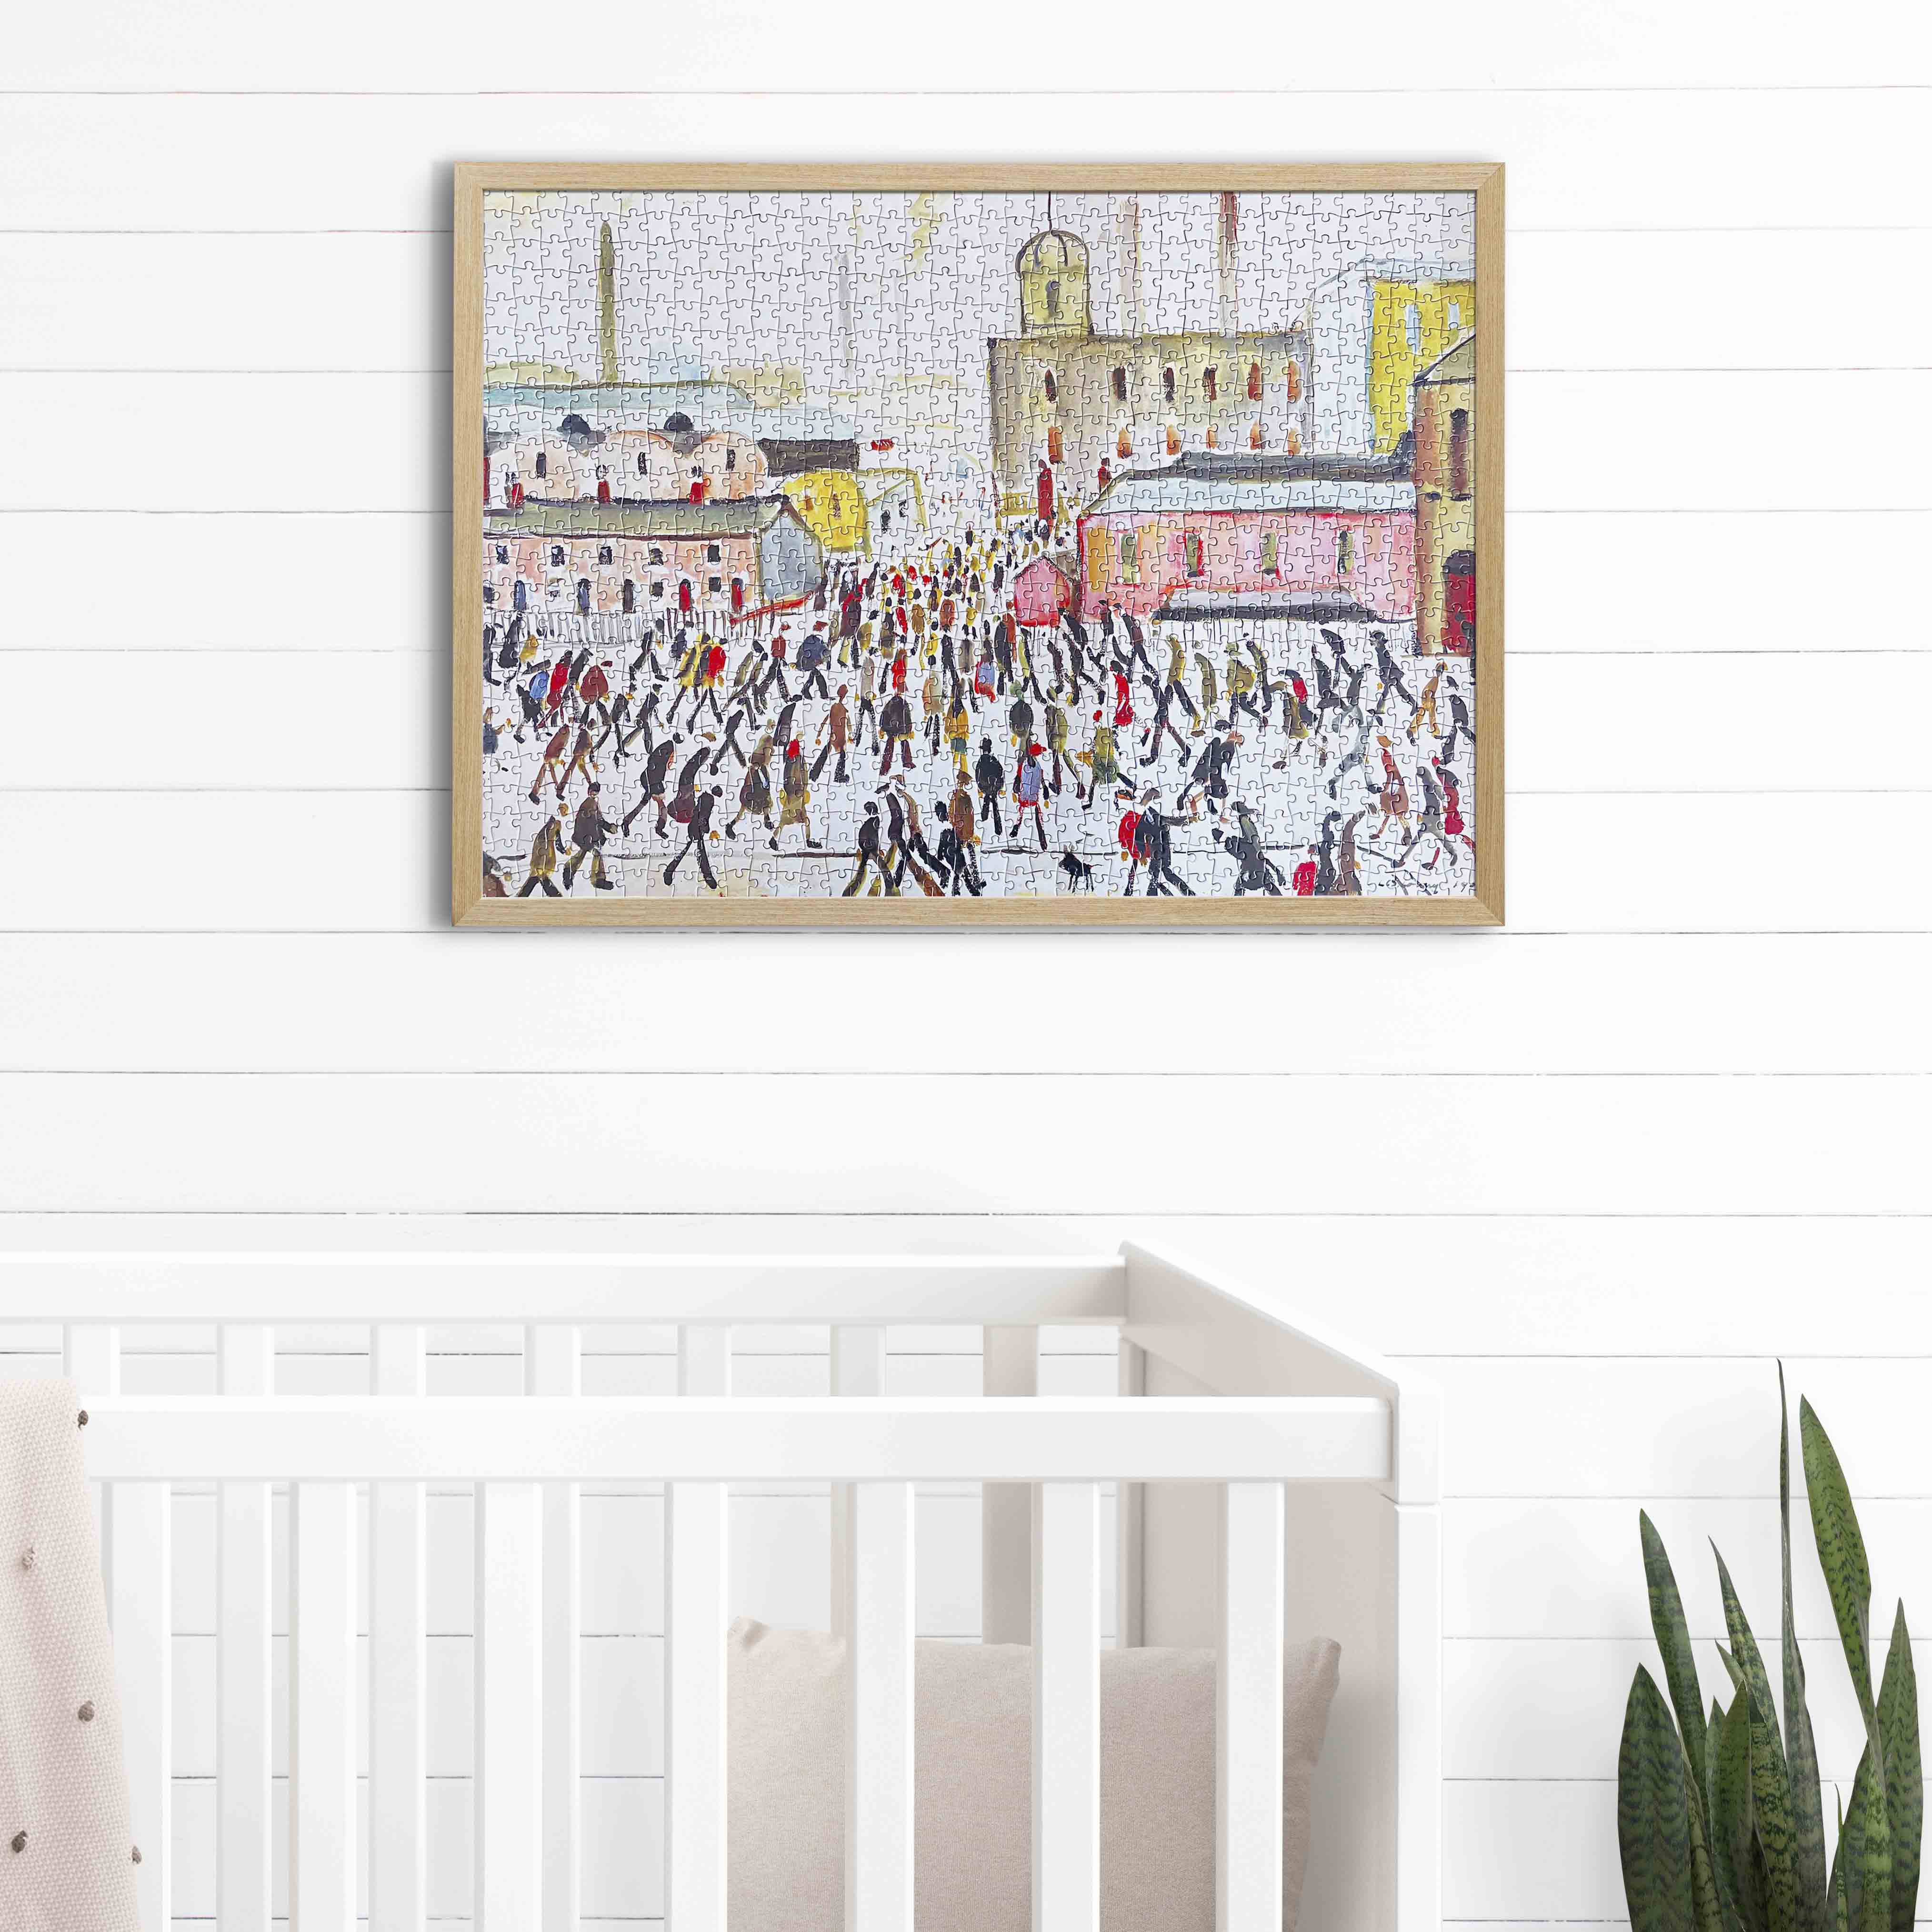 Decorative L. S. Lowry Puzzle Art: Going To Work, 1000 Pieces, Framed for Elegant Nursery Interior Design